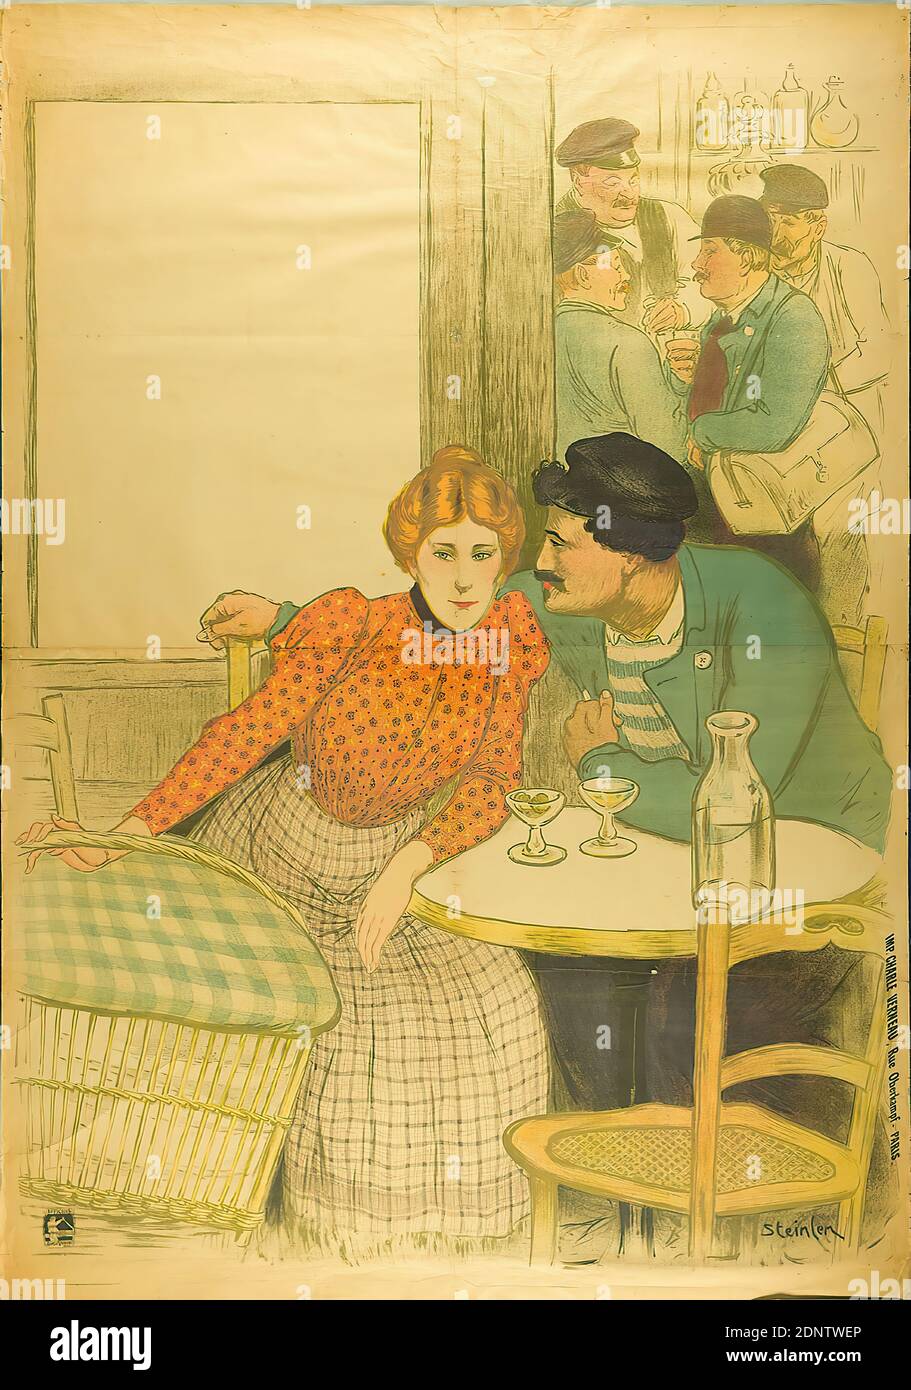 Théophile-Alexandre Steinlen, Imprimerie Charles Verneau, L'Assommoir, paper, lithography, total: height: 198 cm; width: 139,5 cm, signed: im Druck u. r.: Steinlen, theater posters, worker/working class, inn, coffee house, pub, relations between the sexes, washing clothes Stock Photo